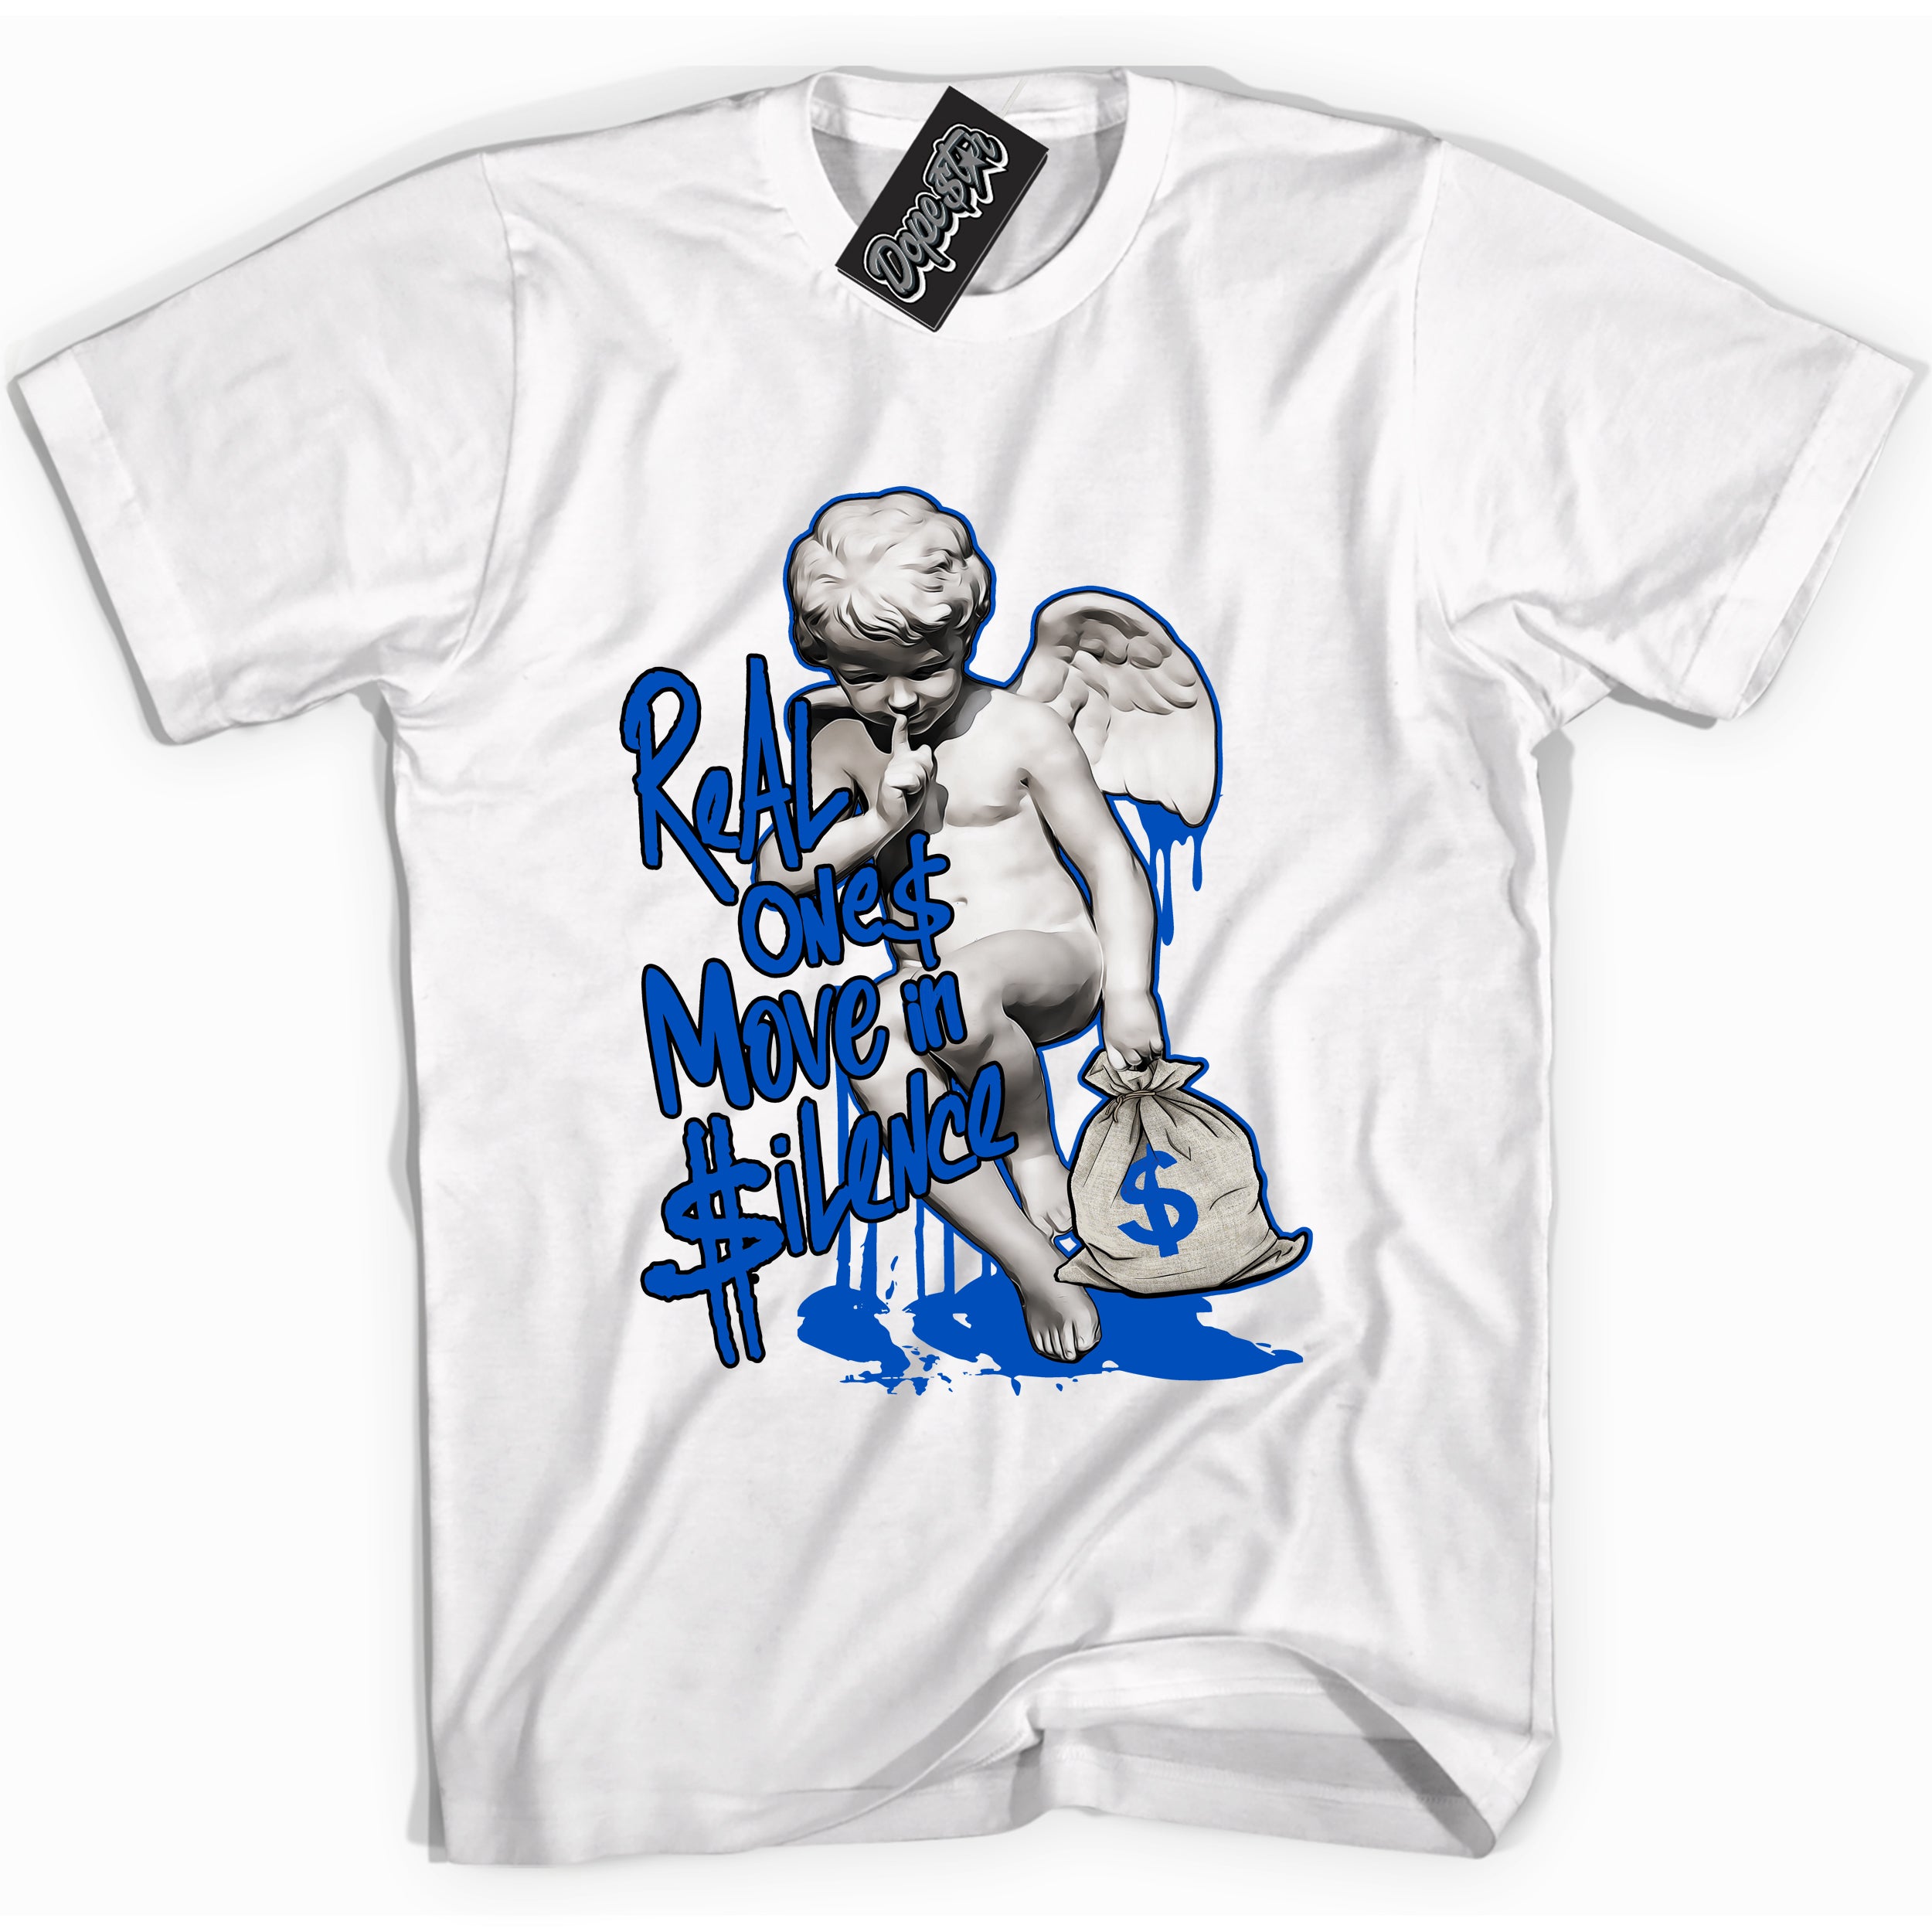 Cool White graphic tee with "Real Ones Cherub" design, that perfectly matches Royal Reimagined 1s sneakers 